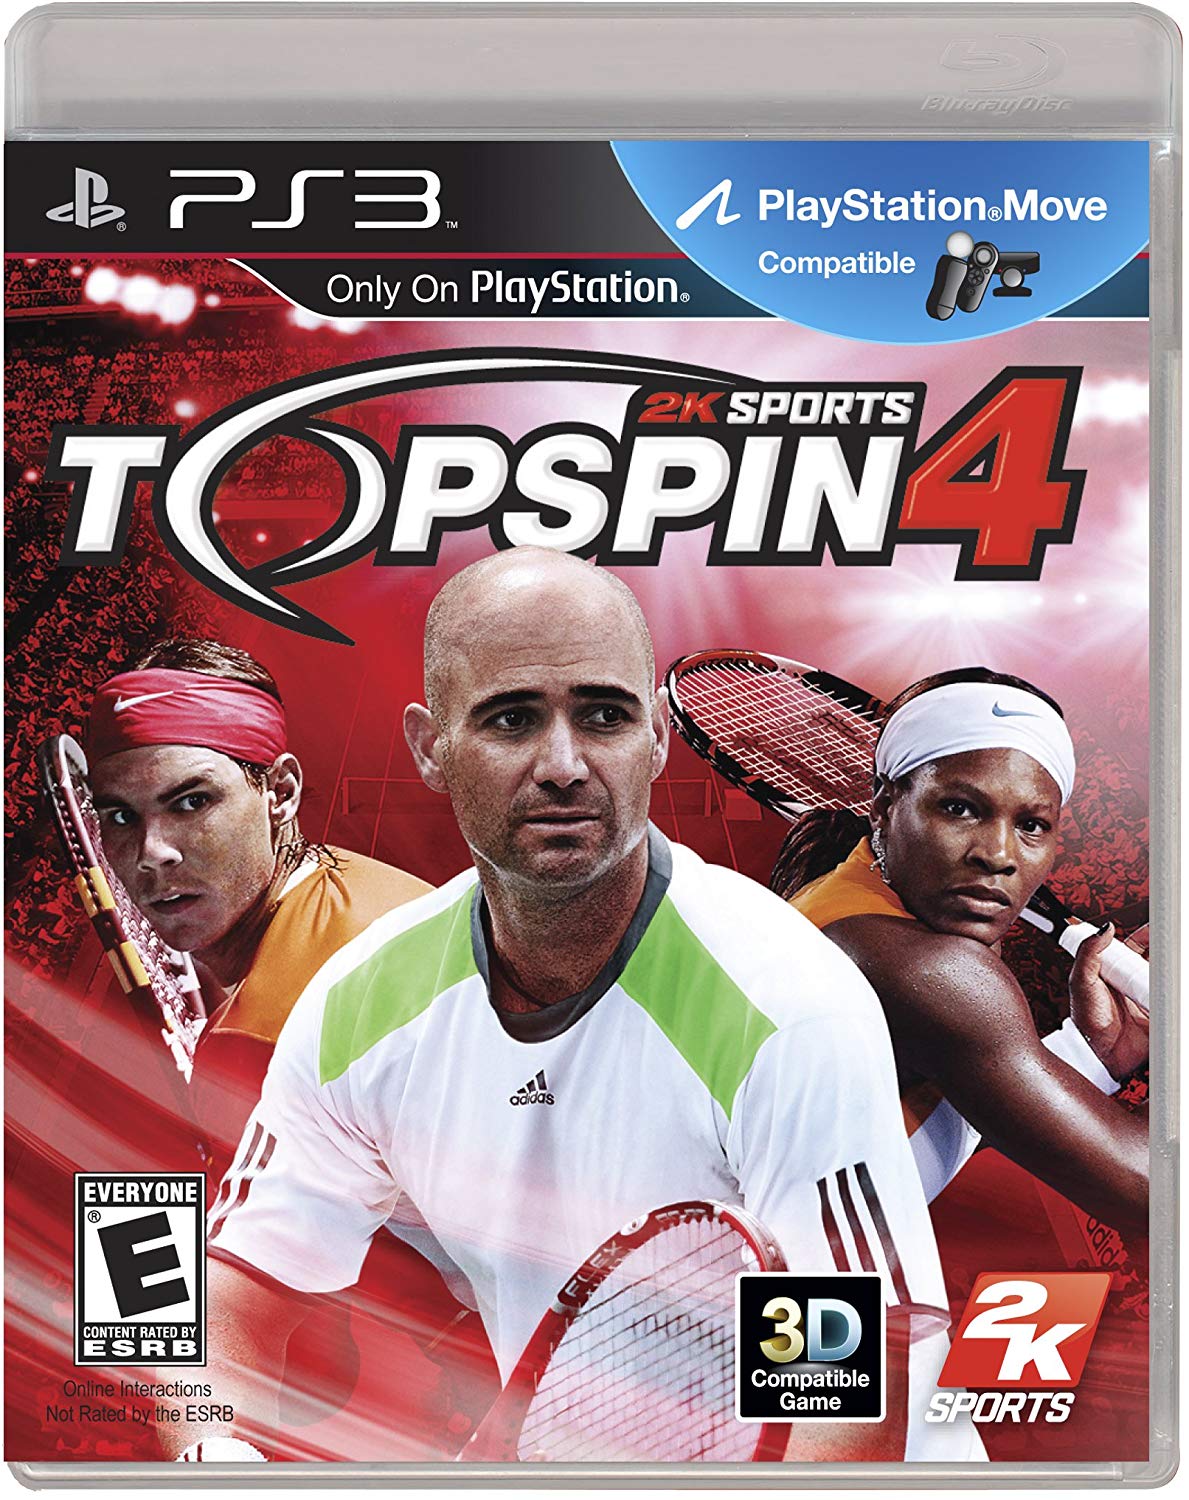 PS3: TOPSPIN 4 (COMPLETE)